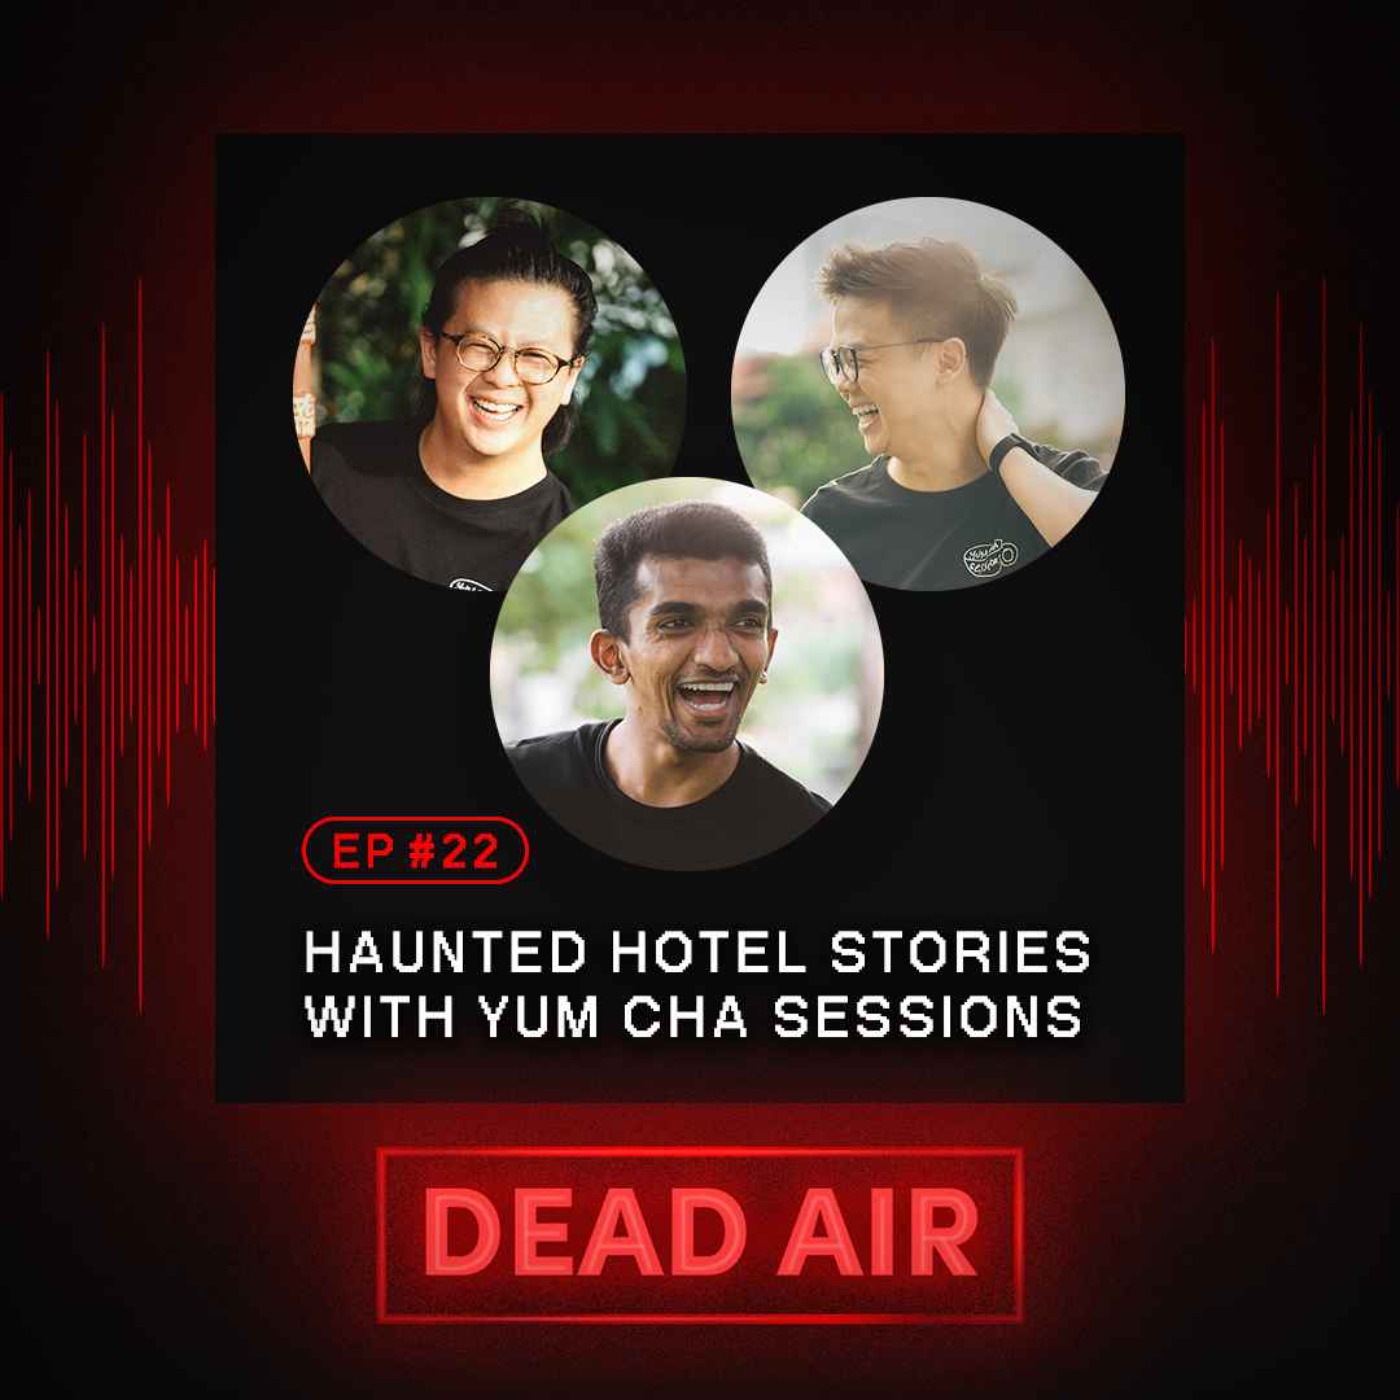 Haunted Hotel Stories with Yum Cha Sessions - DEAD AIR